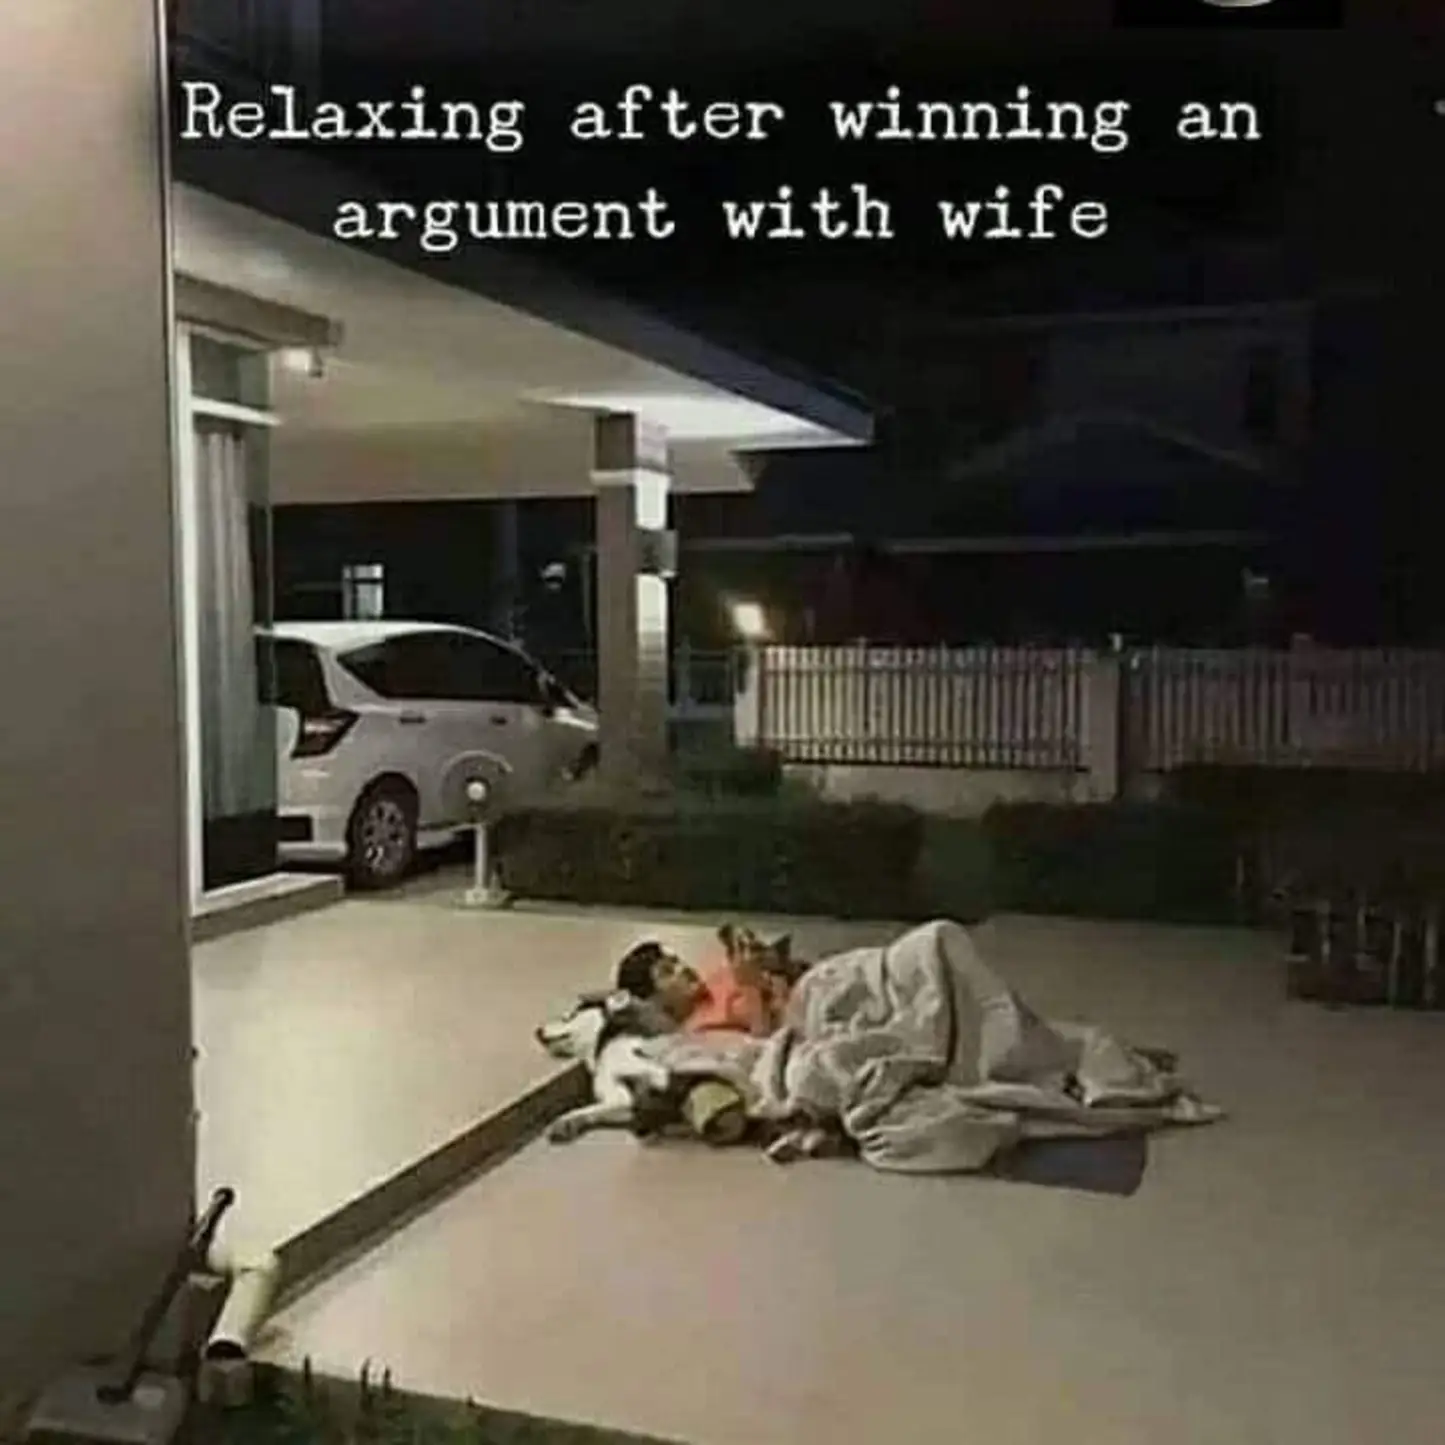 Relaxing after winning an argument with wife